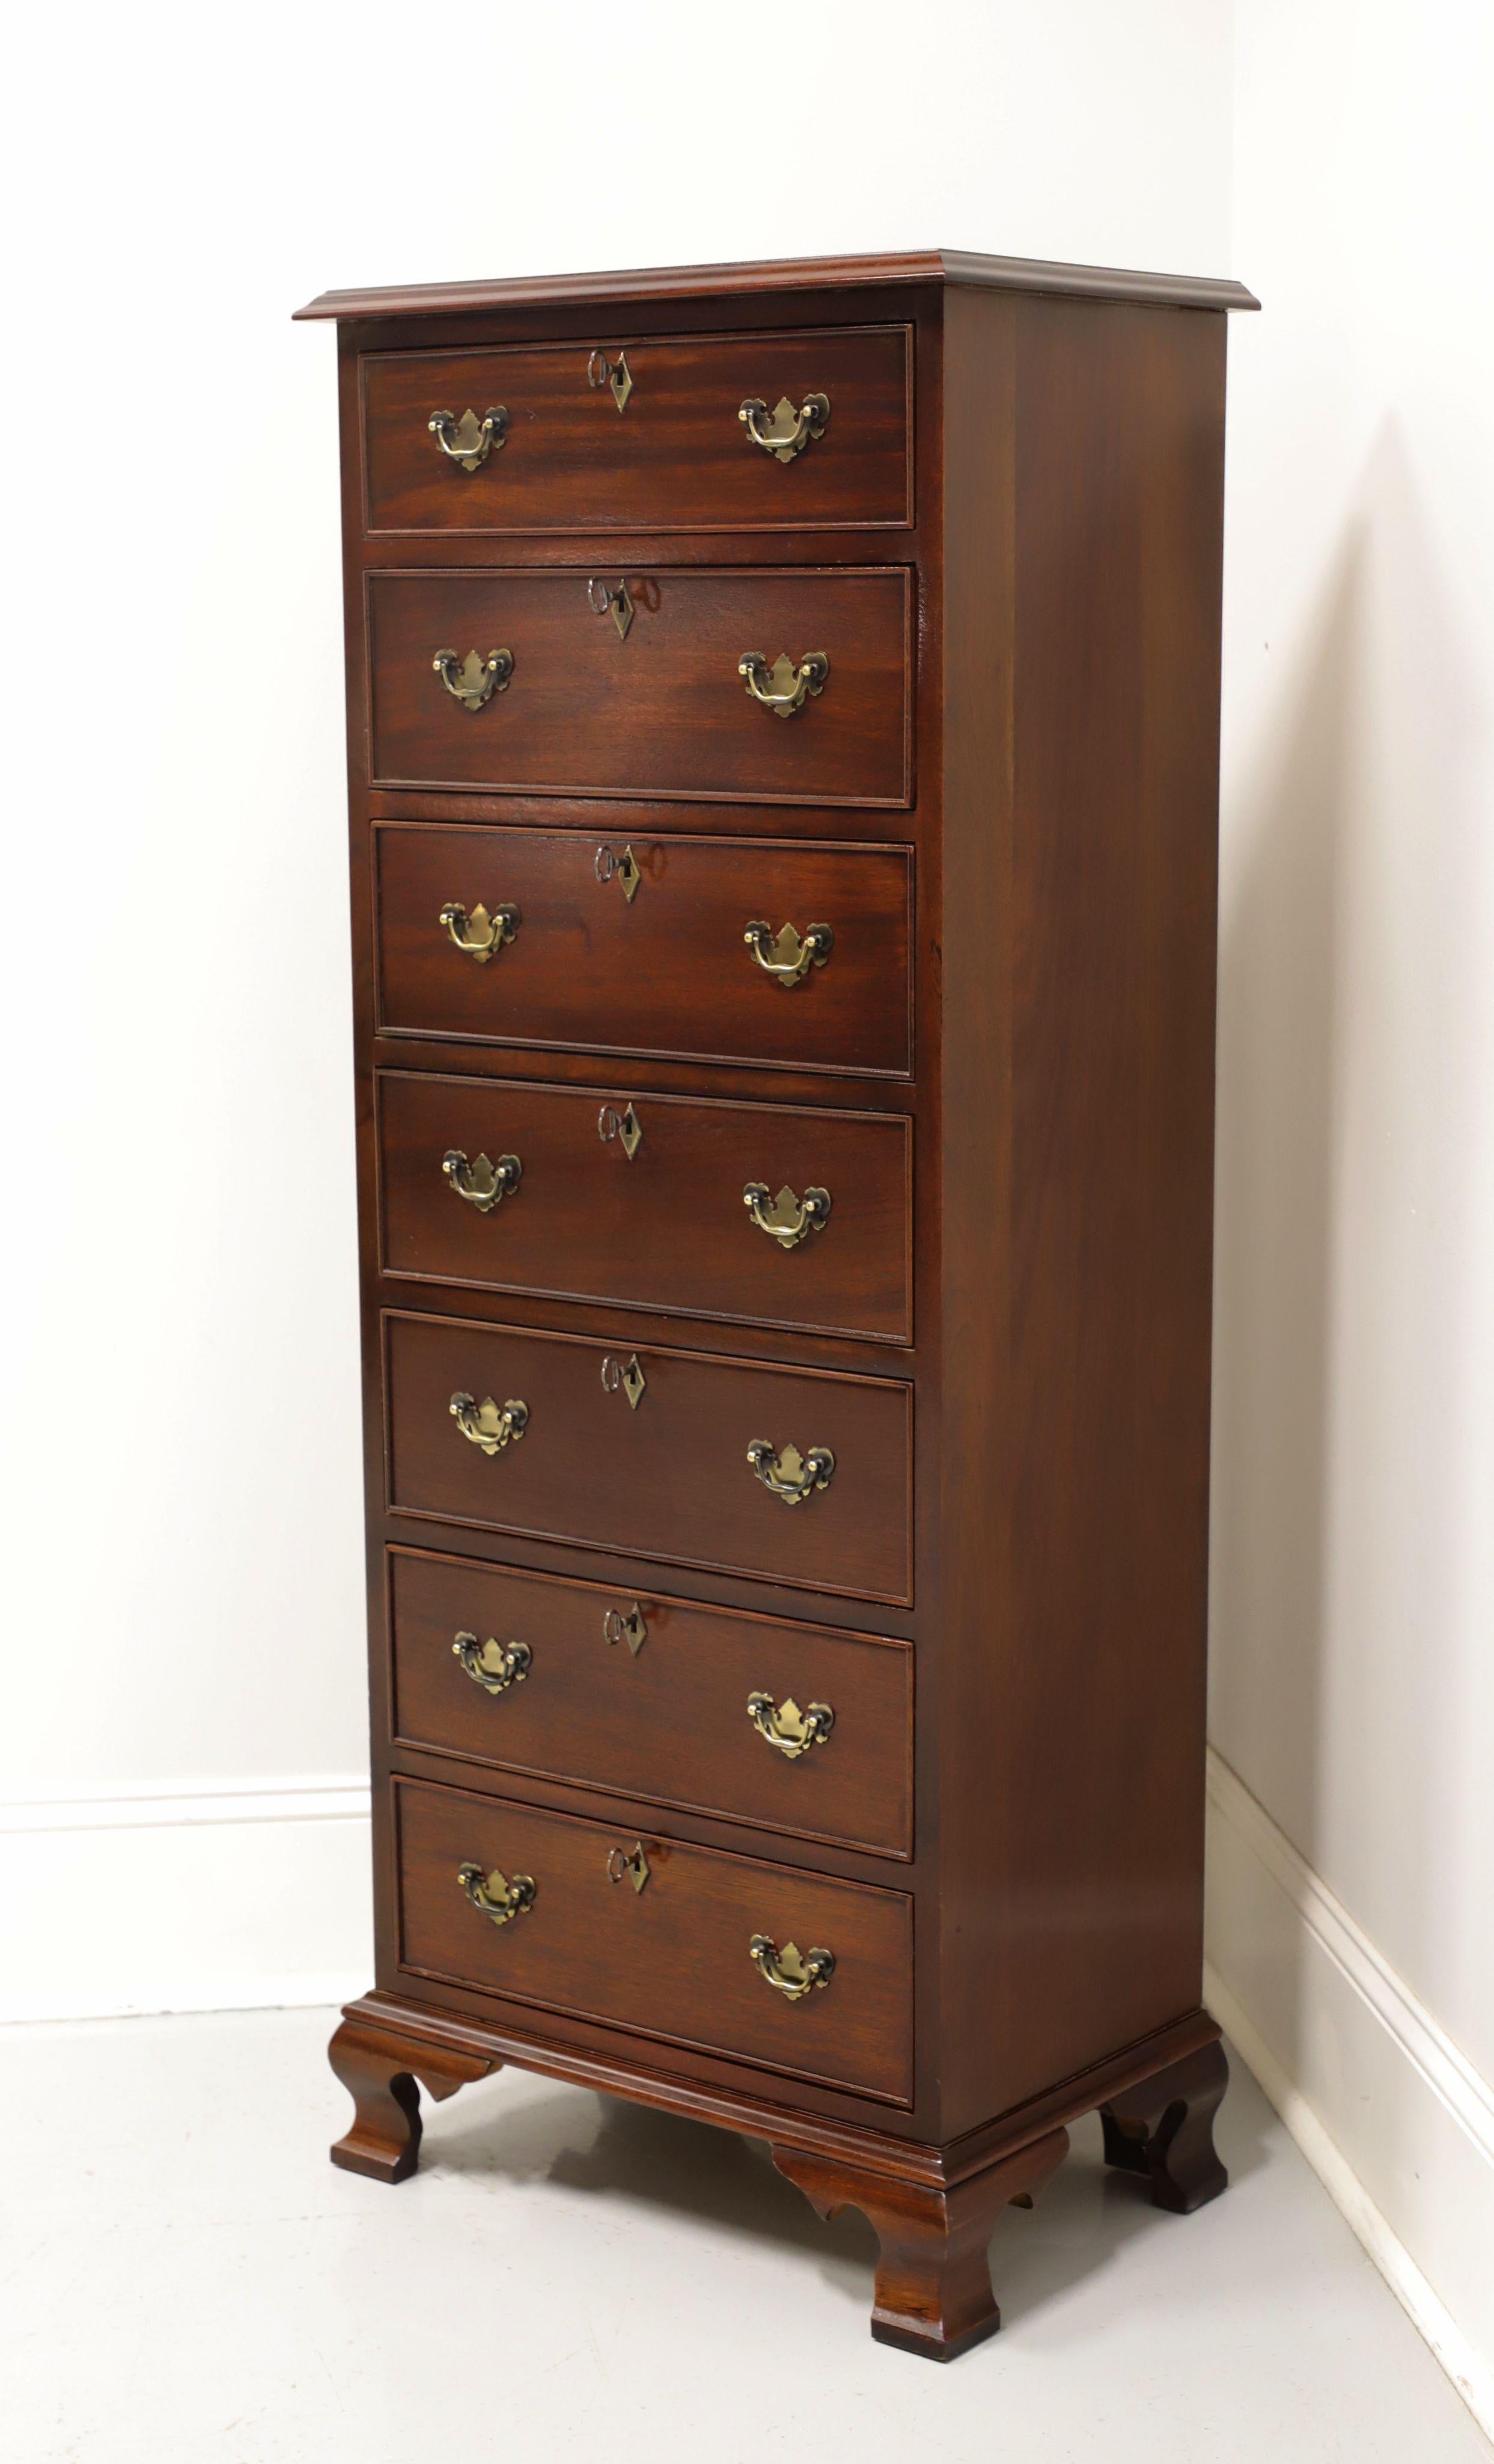 American CRAFTIQUE Solid Mahogany Chippendale Style Semainier Lingerie Chest w/ Ogee Feet